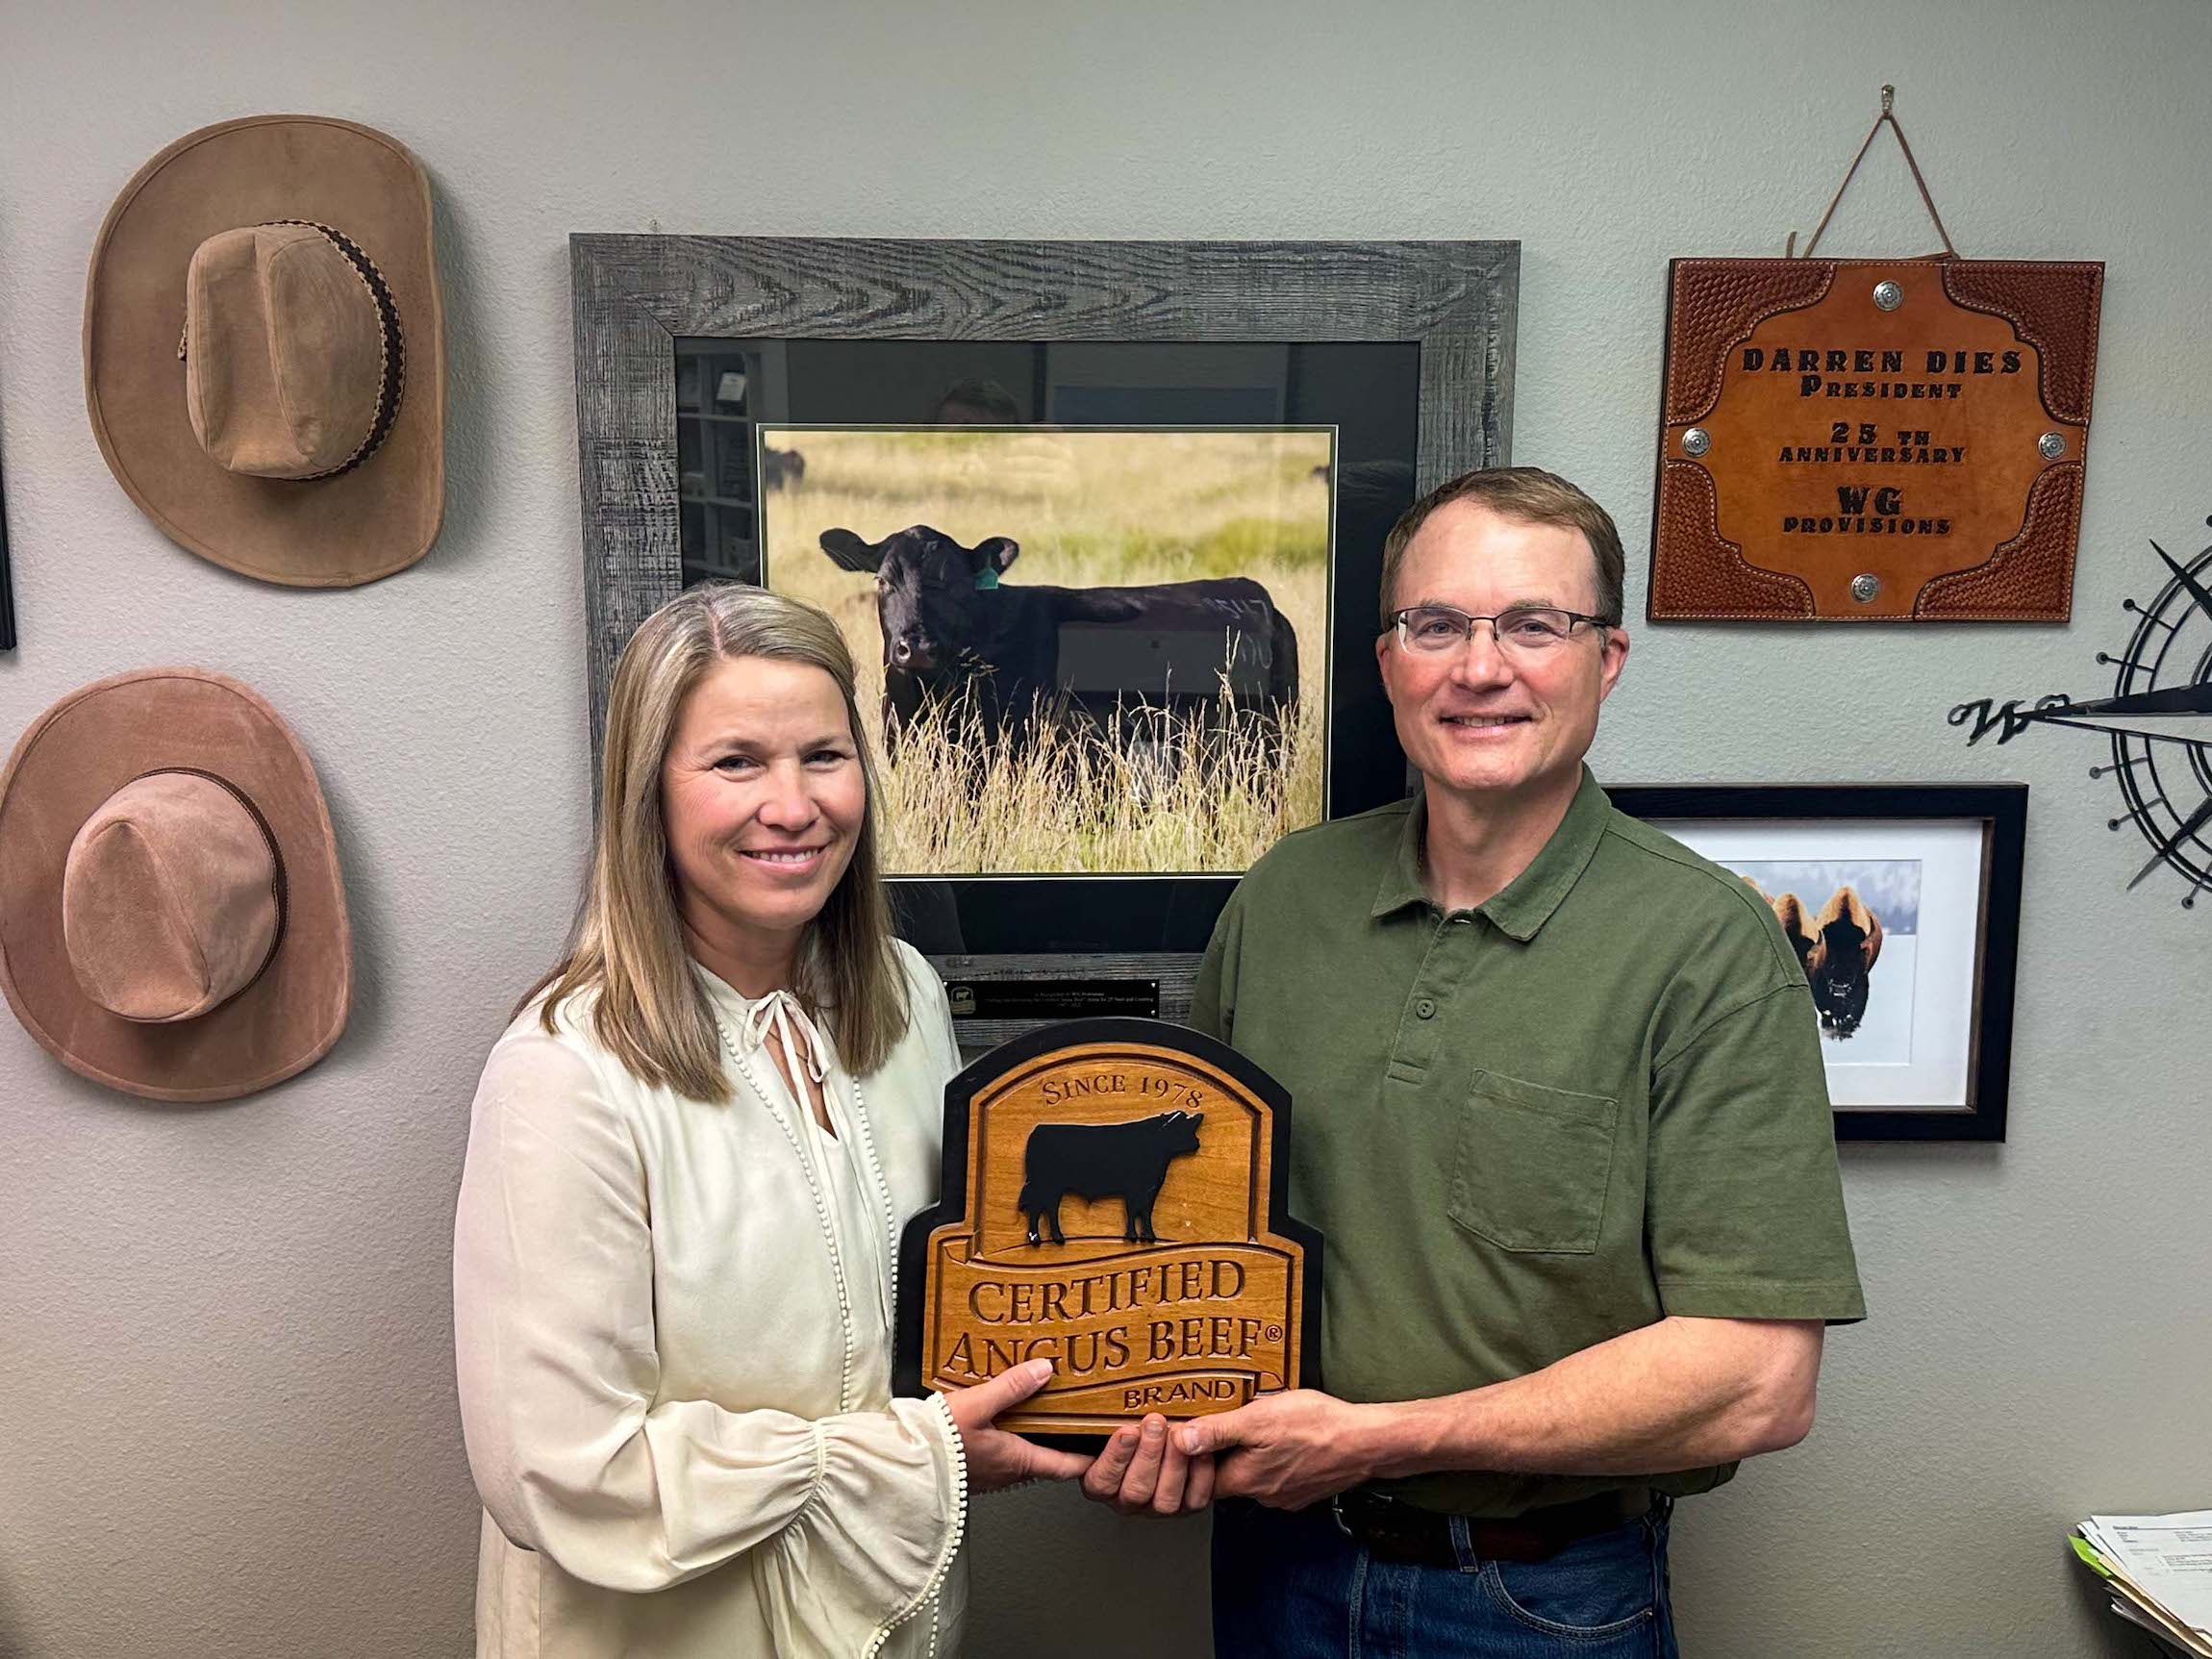 A woman and a man, both smiling, hold a "Certified Angus Beef" plaque. Behind them is a framed picture of a black Angus cow. They are standing in a room with hats on the wall and a name plaque for "Darren Dies.